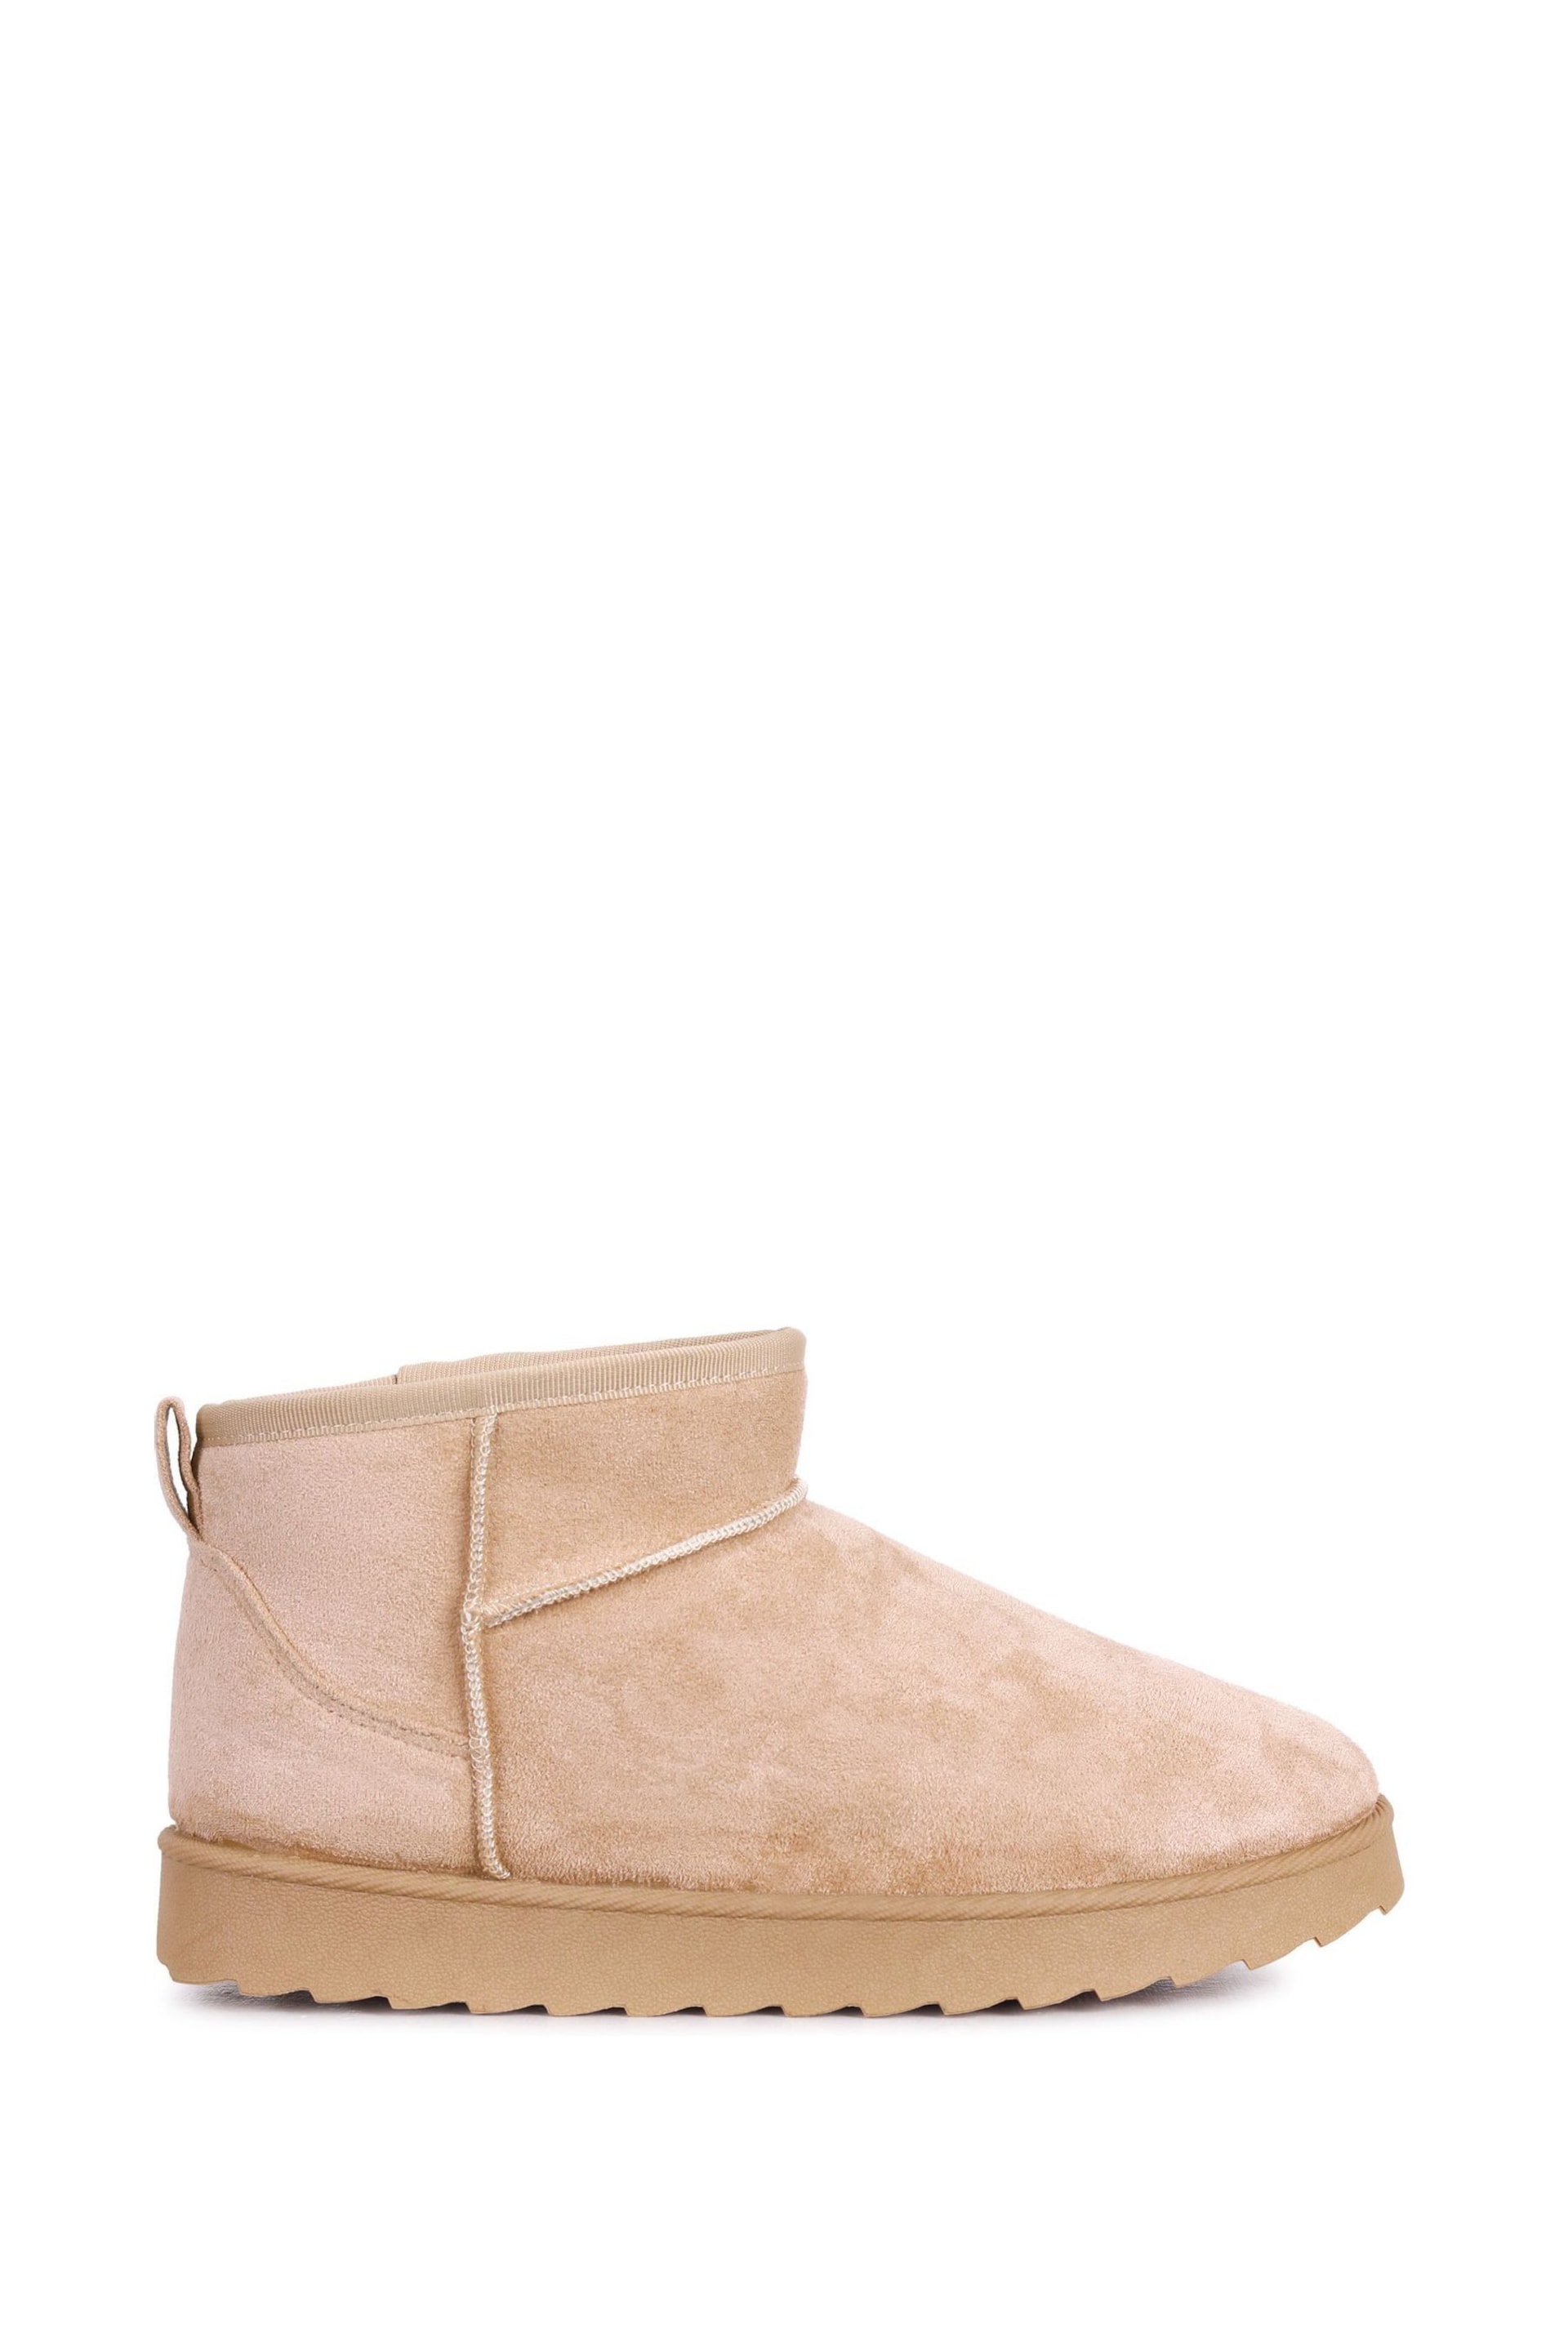 Linzi Nude Mini Addy Faux Suede Faux Fur Lined Ankle Boots - Image 2 of 4